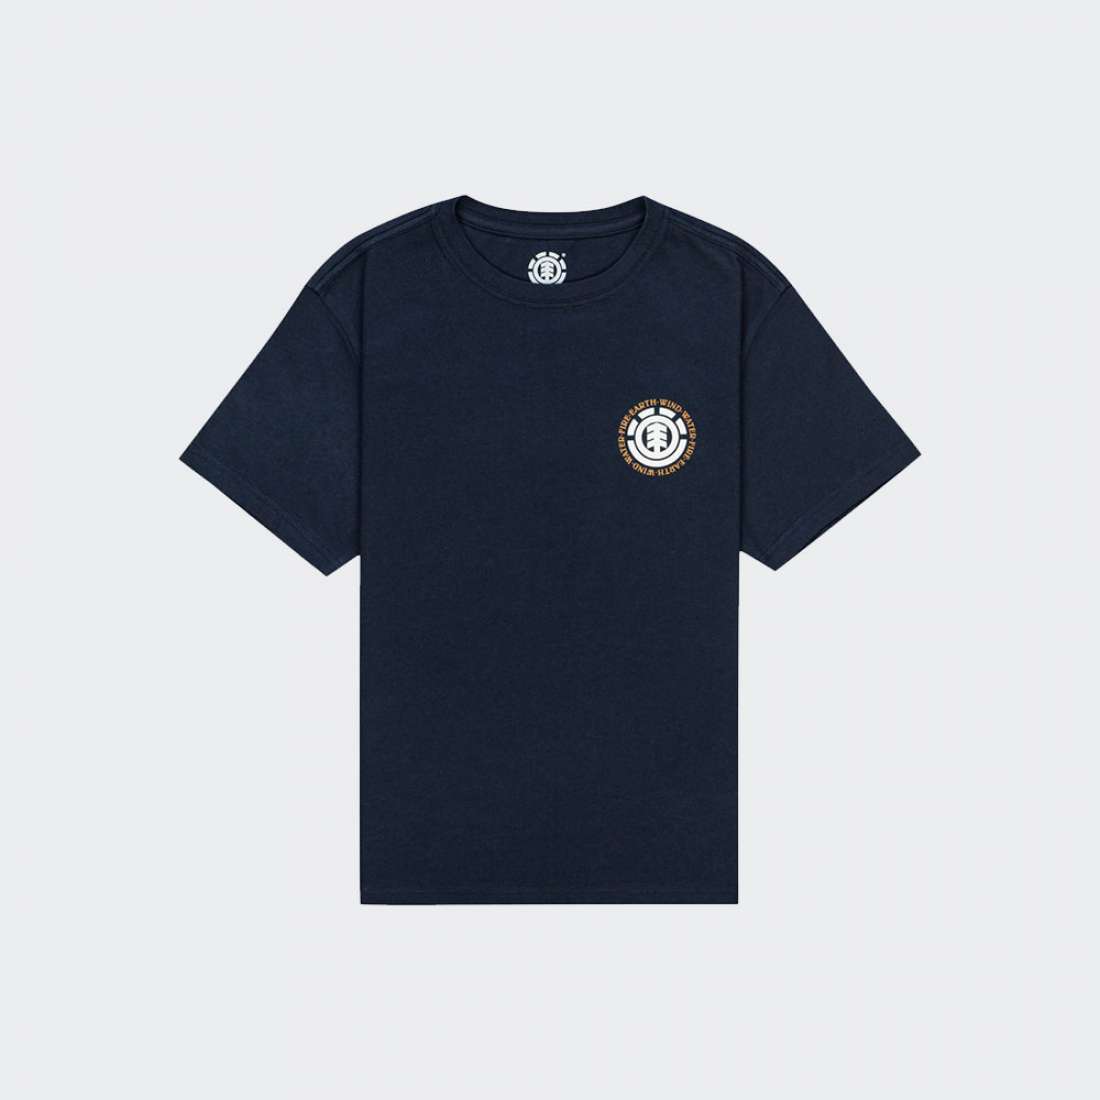 TSHIRT ELEMENT SEAL BP YOUTH ECLIPSE NAVY